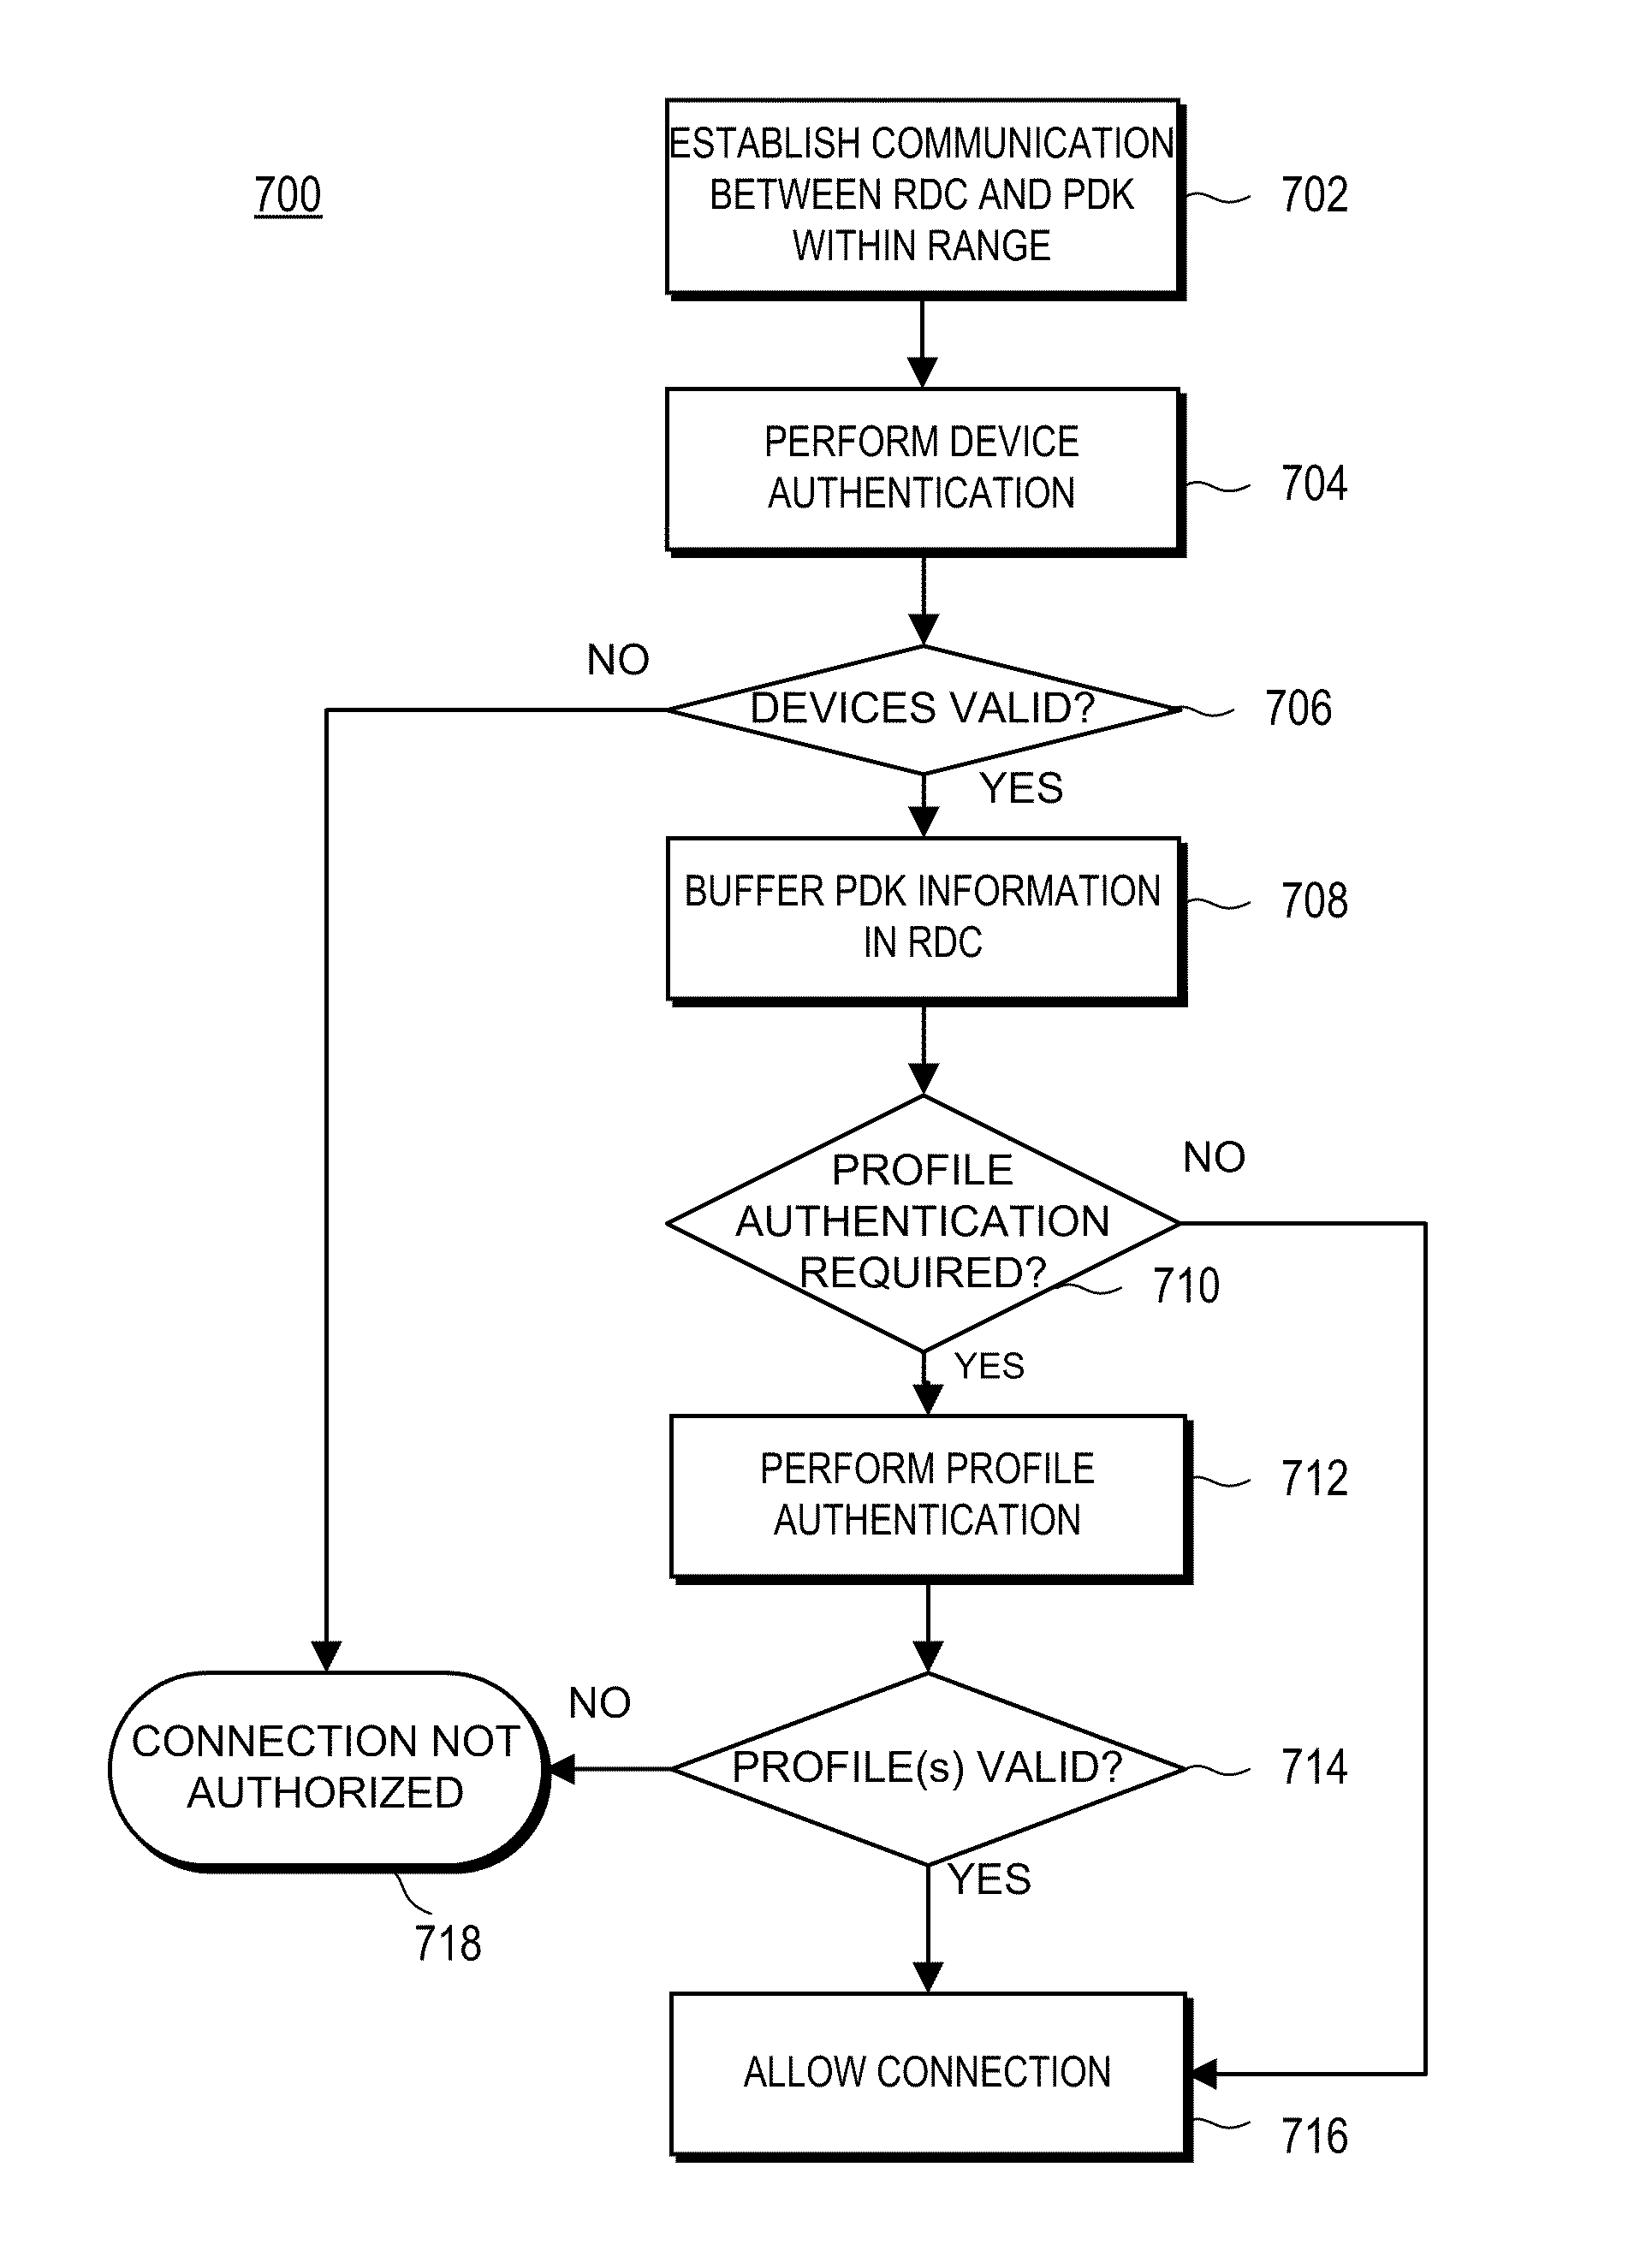 Proximity-based system for automatic application or data access and item tracking